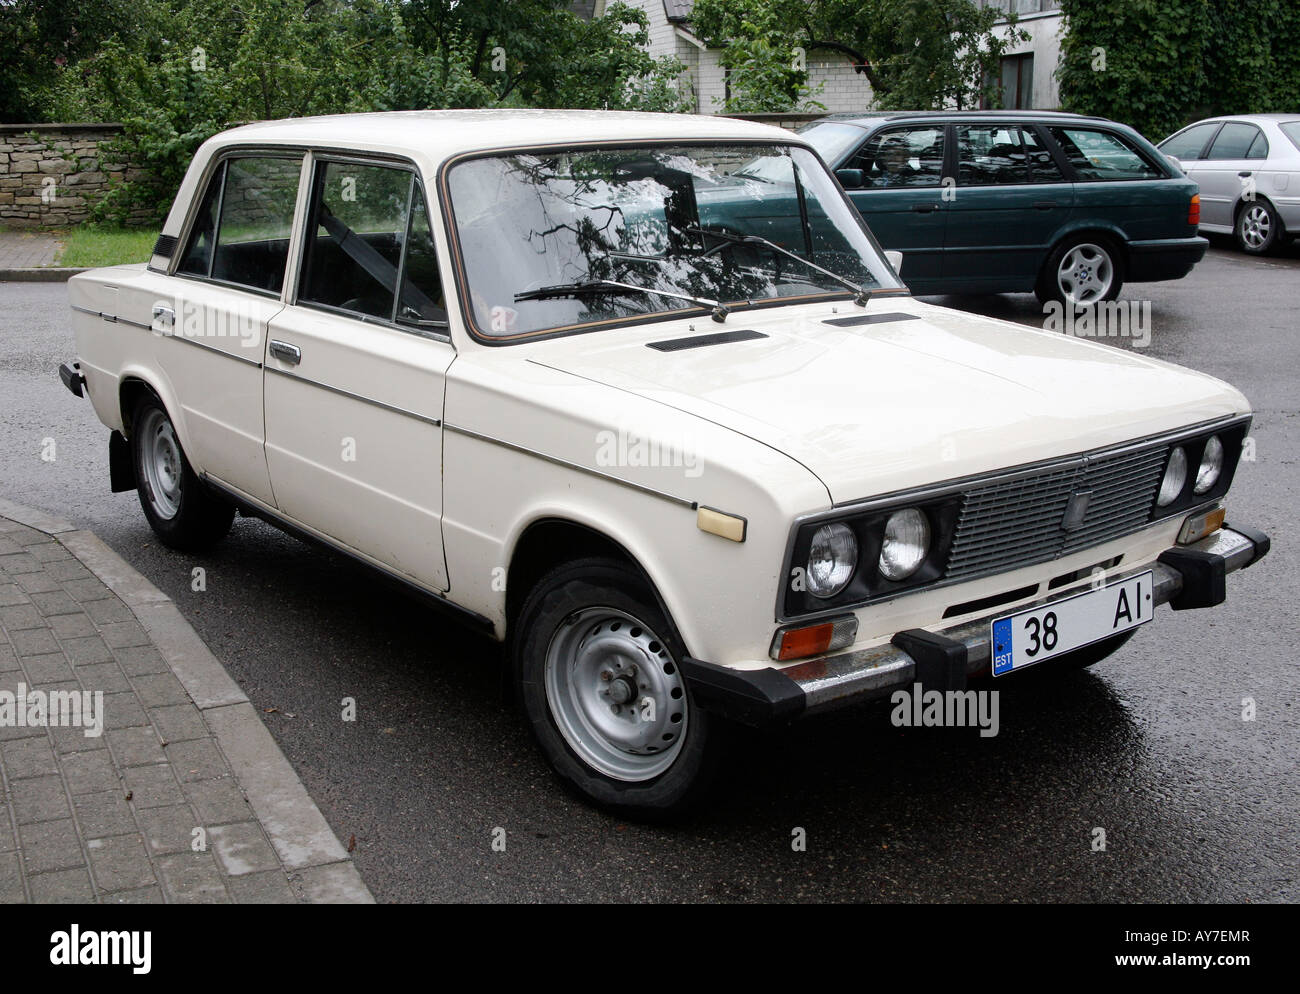 Russian car Lada seen on a rainy day on the street Stock Photo